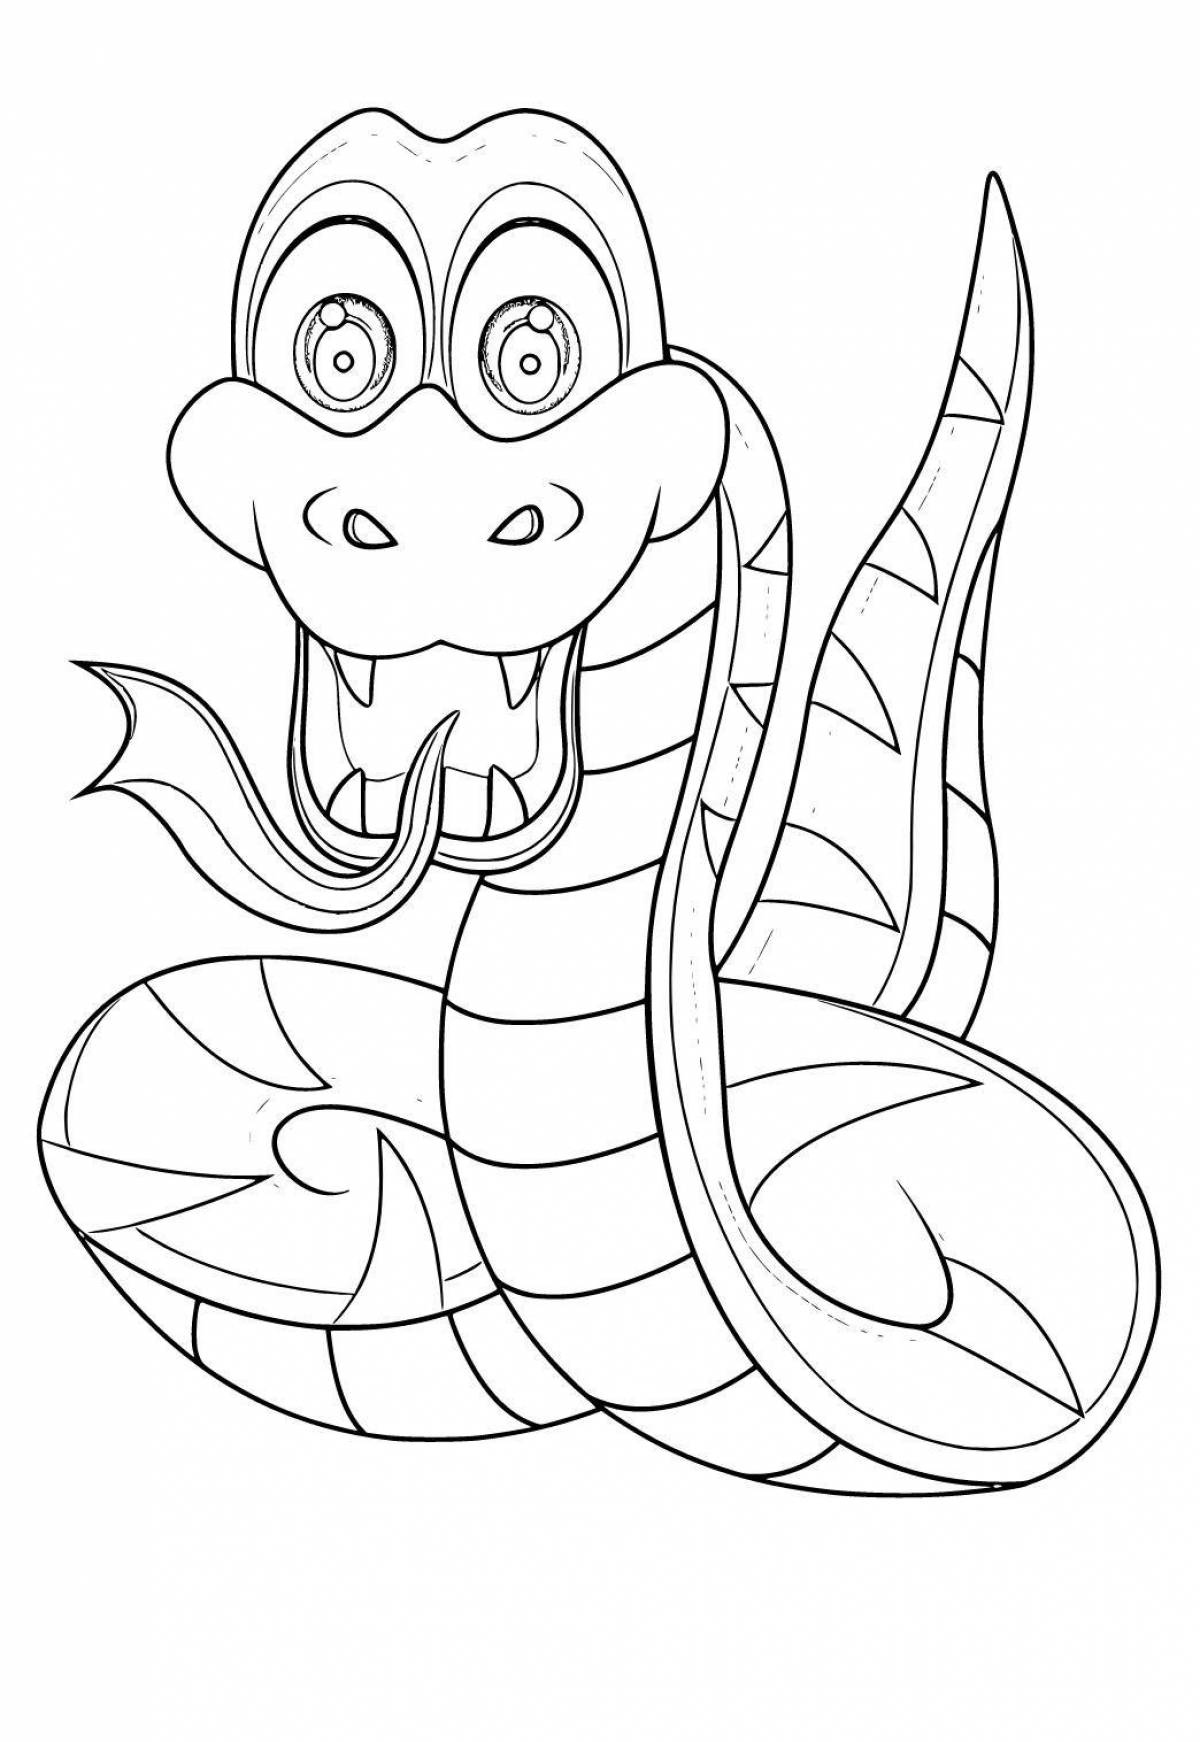 Vibrant snake coloring book for 3-4 year olds